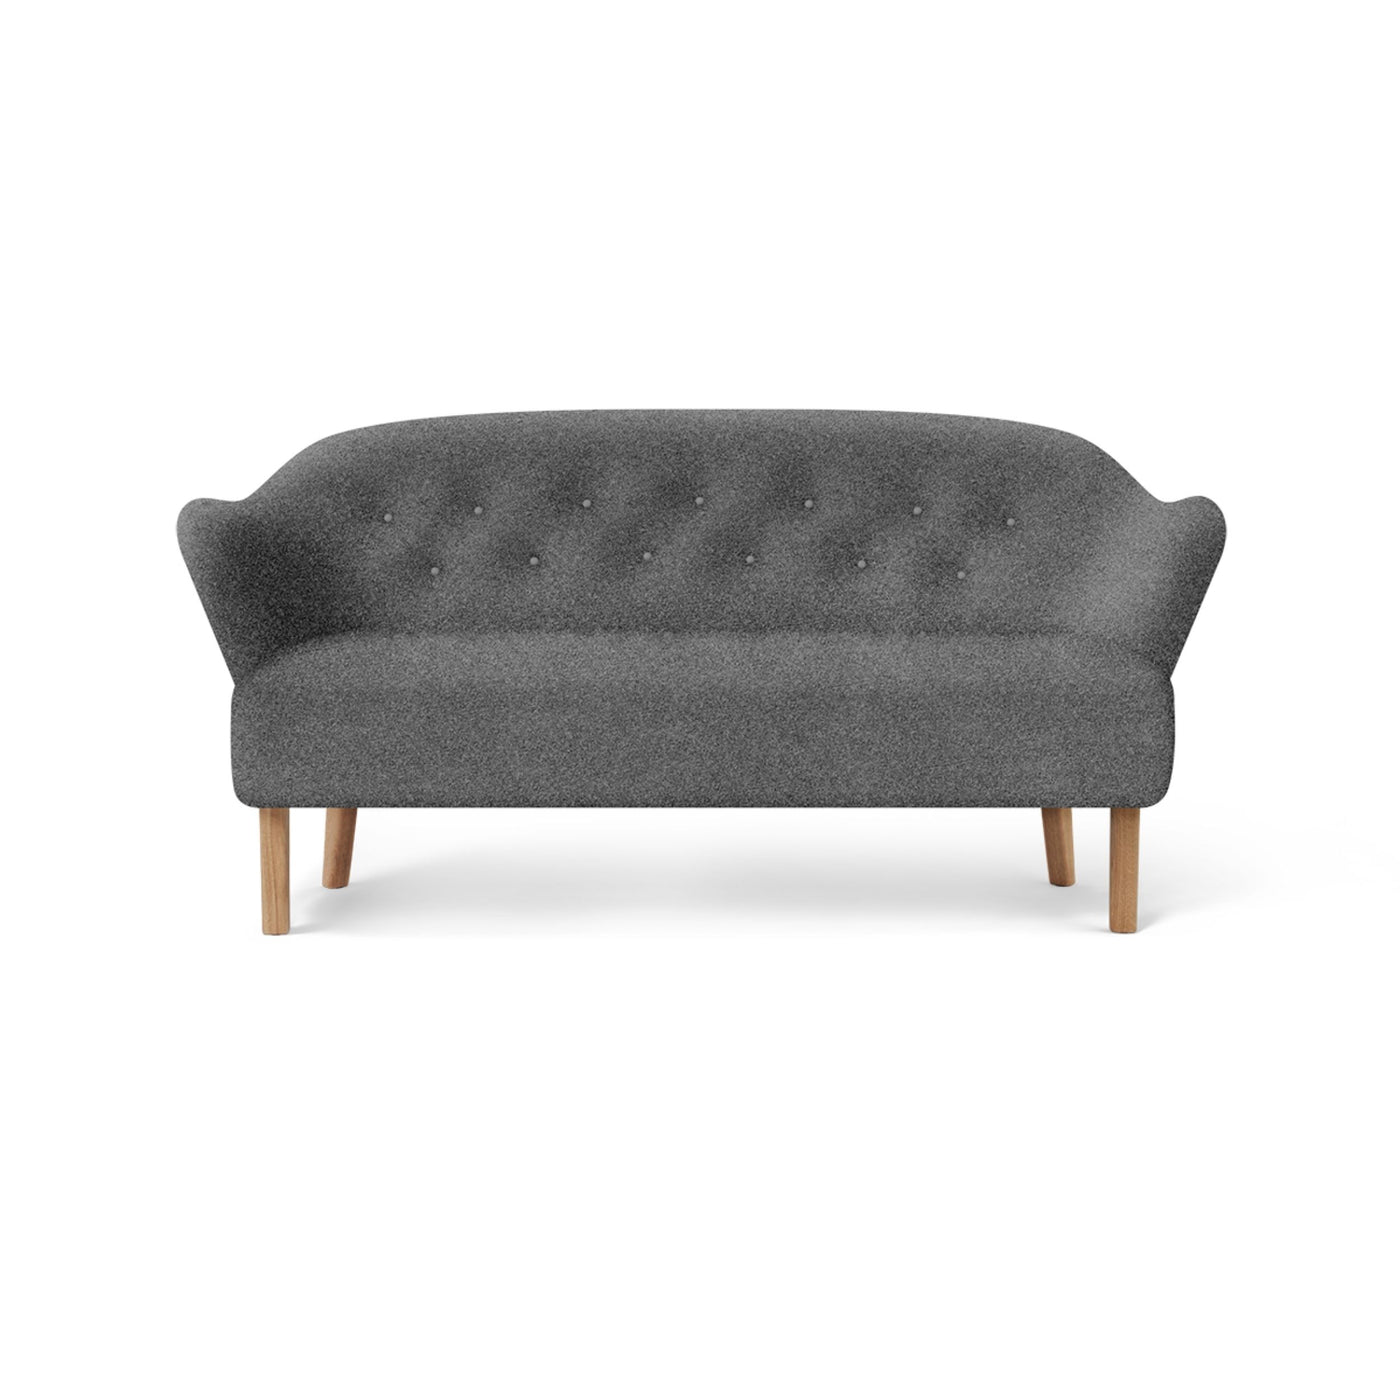 By Lassen Ingeborg sofa with natural oak legs. Made to order from someday designs. #colour_sahco-nara-2